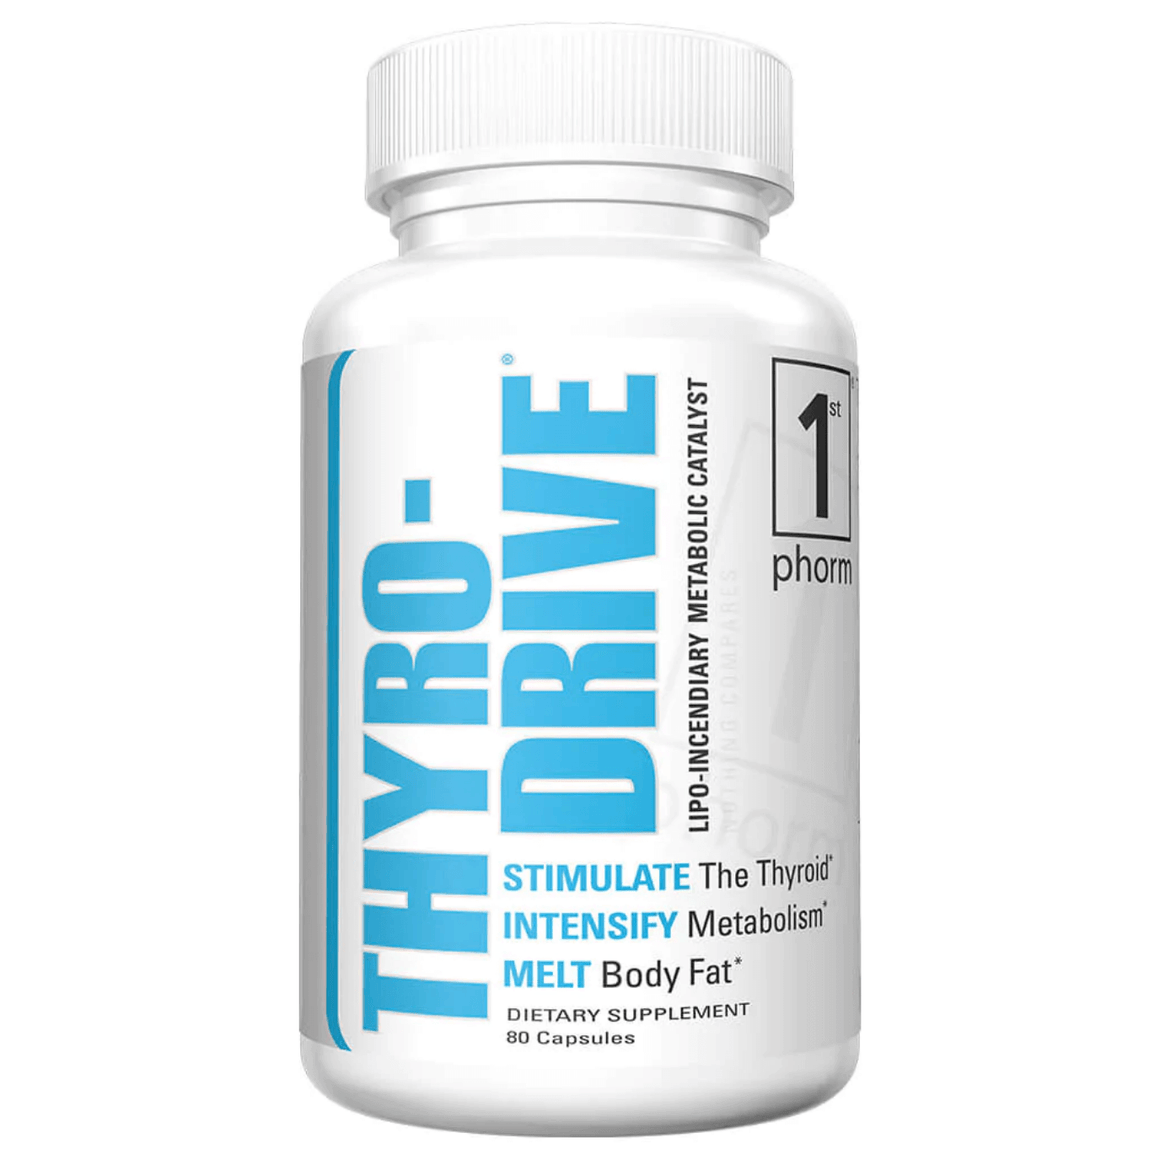 CALL FOR BEST PRICING! 1st Phorm - Thyro-Drive Advanced Metabolism Booster Call Us To Order! 817-301-6816 DESCRIPTION Lipo-Incendiary Metabolic Catalyst Thyro-Drive® is the perfect weapon when it comes to combating a weight loss issue that plagues over 30